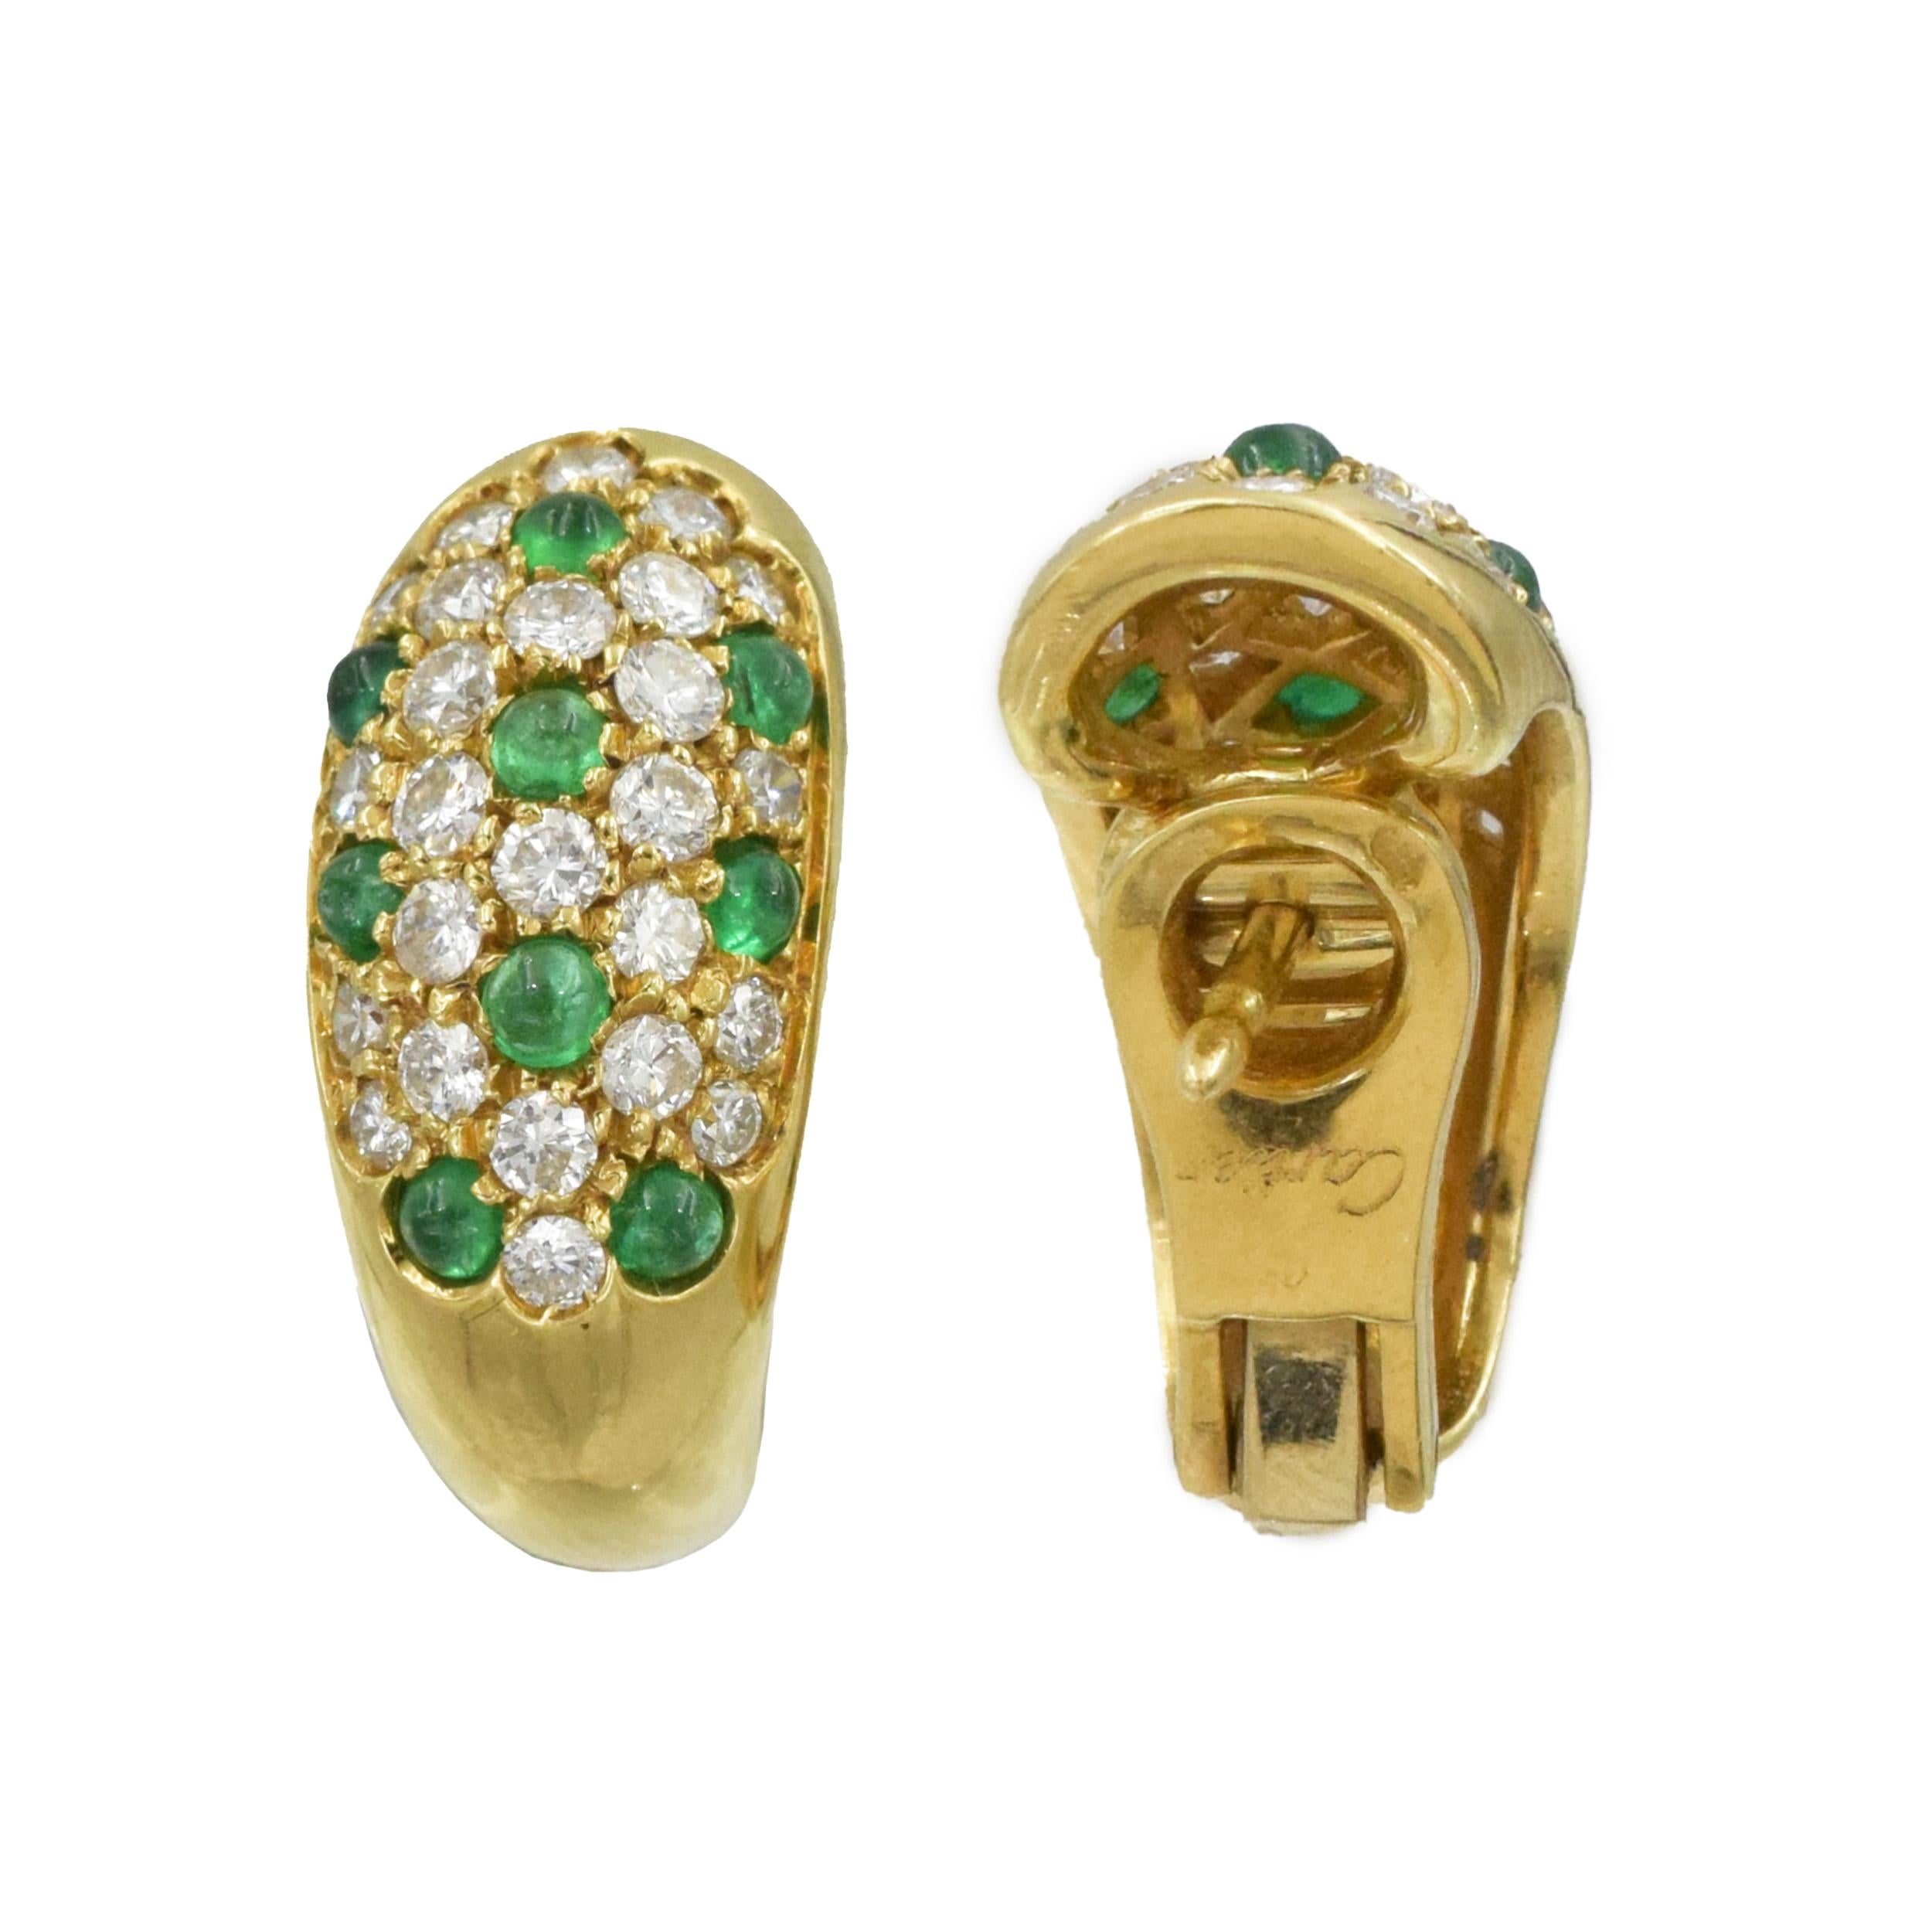 Cartier Diamond and Emerald Earrings and Ring Set For Sale 4